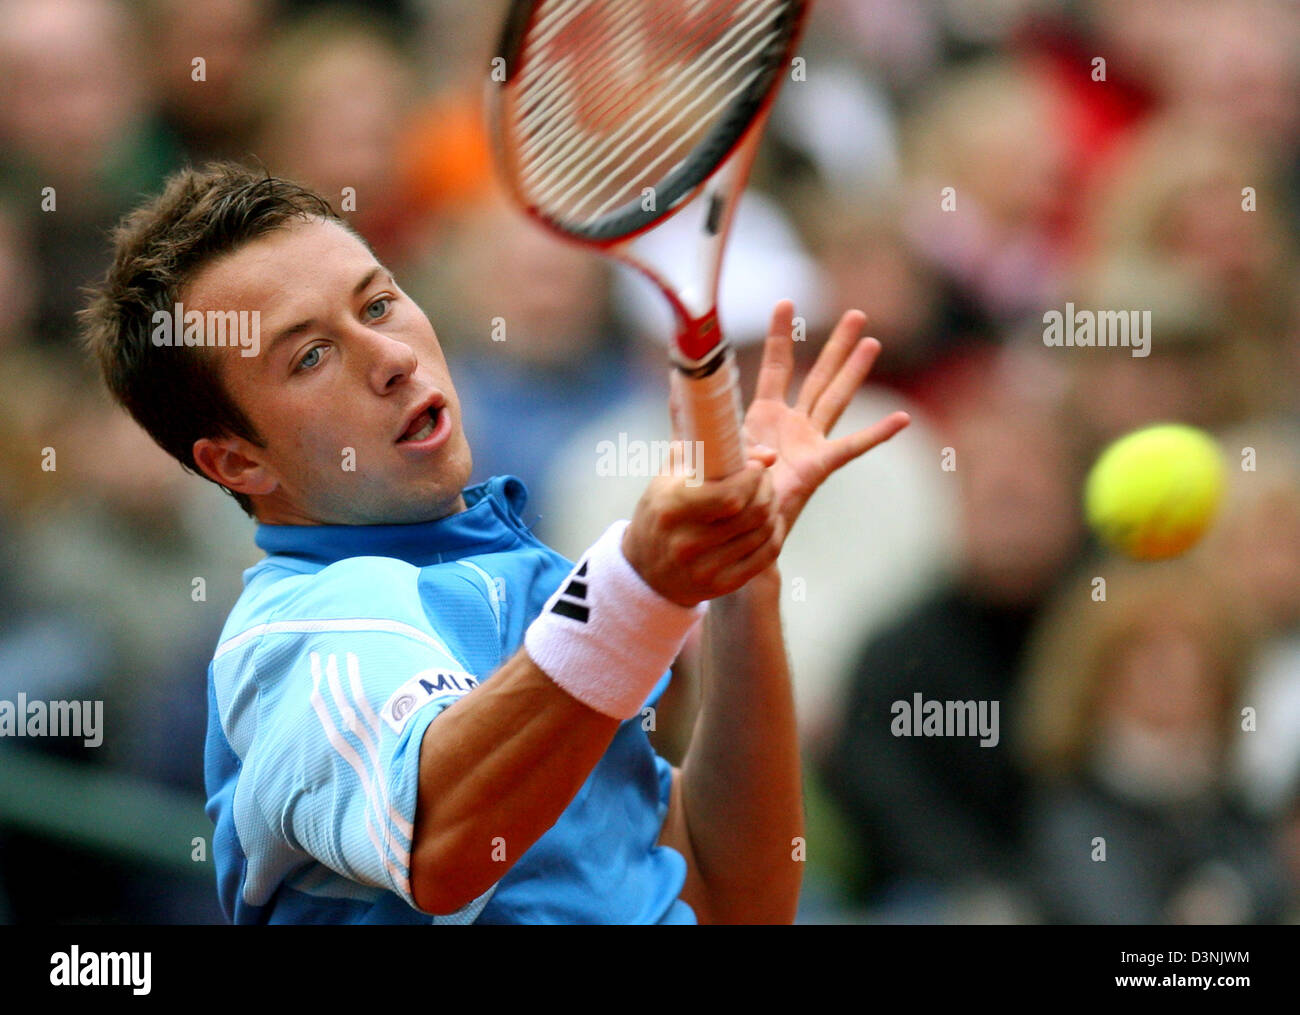 German tennis pro Philipp Kohlschreiber returns a ball during his match against Czech Vik at the World Team Cup in Duesseldorf, Germany, 25 May 2006. Kohlschreiber won the match 6-3, 3-6 and 6-1. The German team leads in the red group 1-0. Photo: Felix Heyder Stock Photo